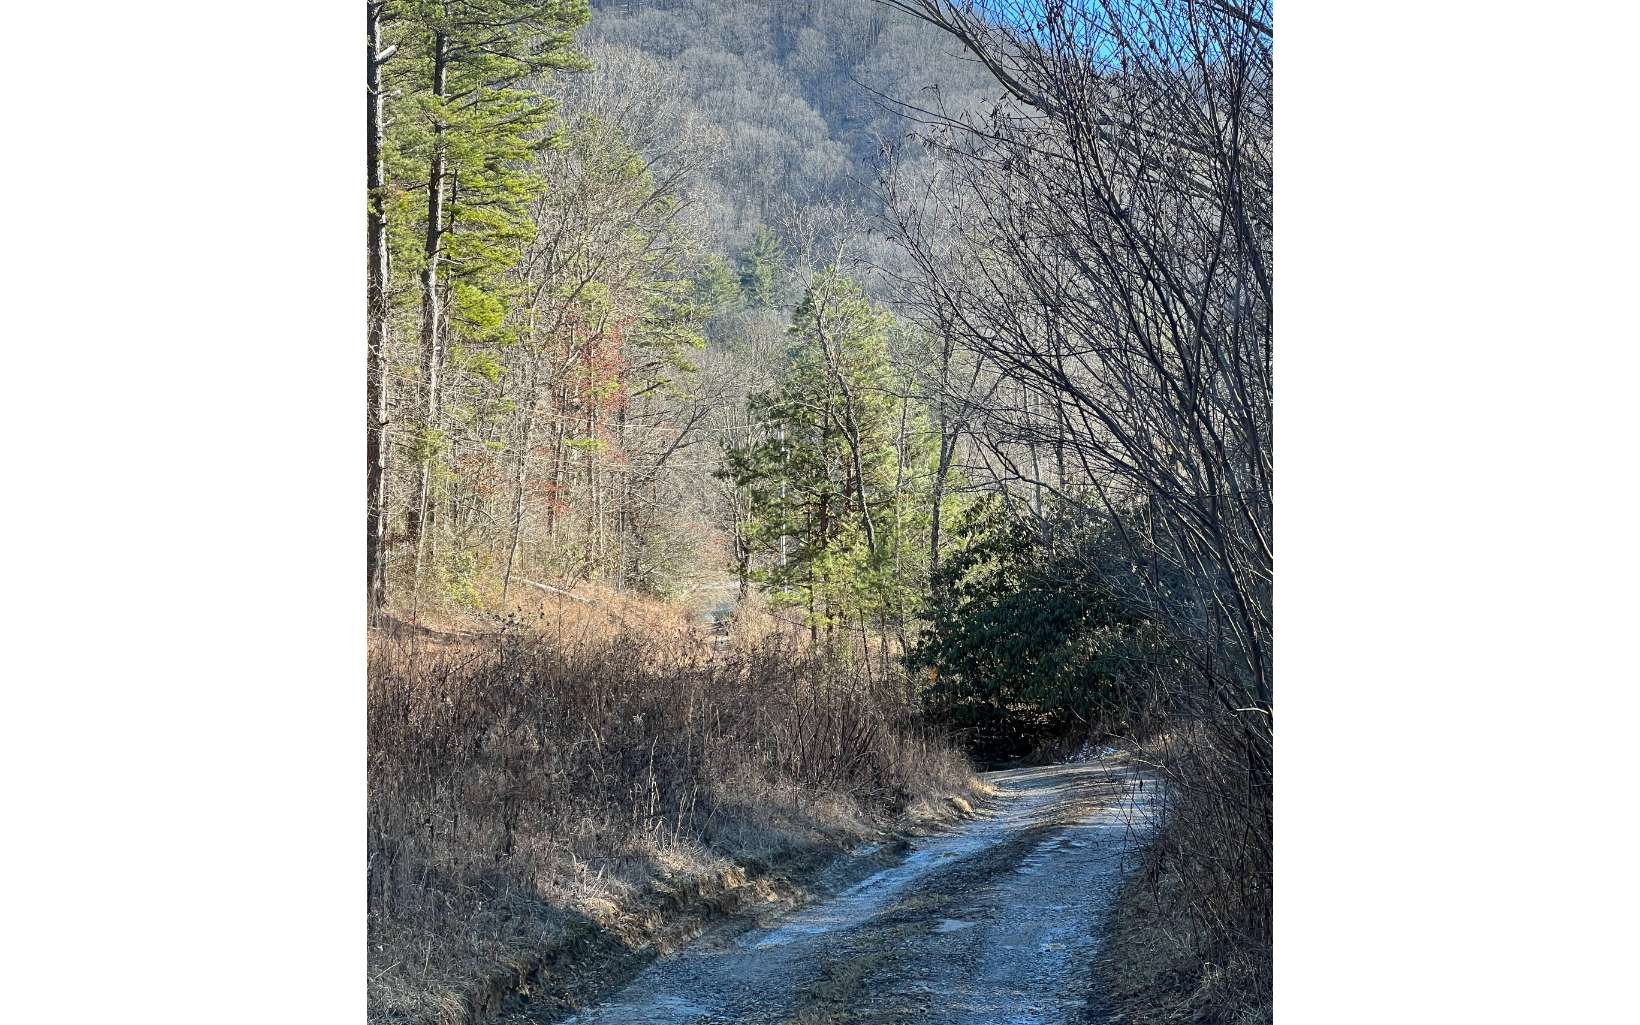 Affordable Wildlife Habitat! 6.13 Acres of Wooded Acreage w/ Bubbly Creek , Lots of Timber & an abundance of rhododendron & mountain laurels! Will have long driveway into this Private haven. Perfect place in the mountains for a New Cabin. Survey! Approx. 11.2 Miles to Blue Ridge.